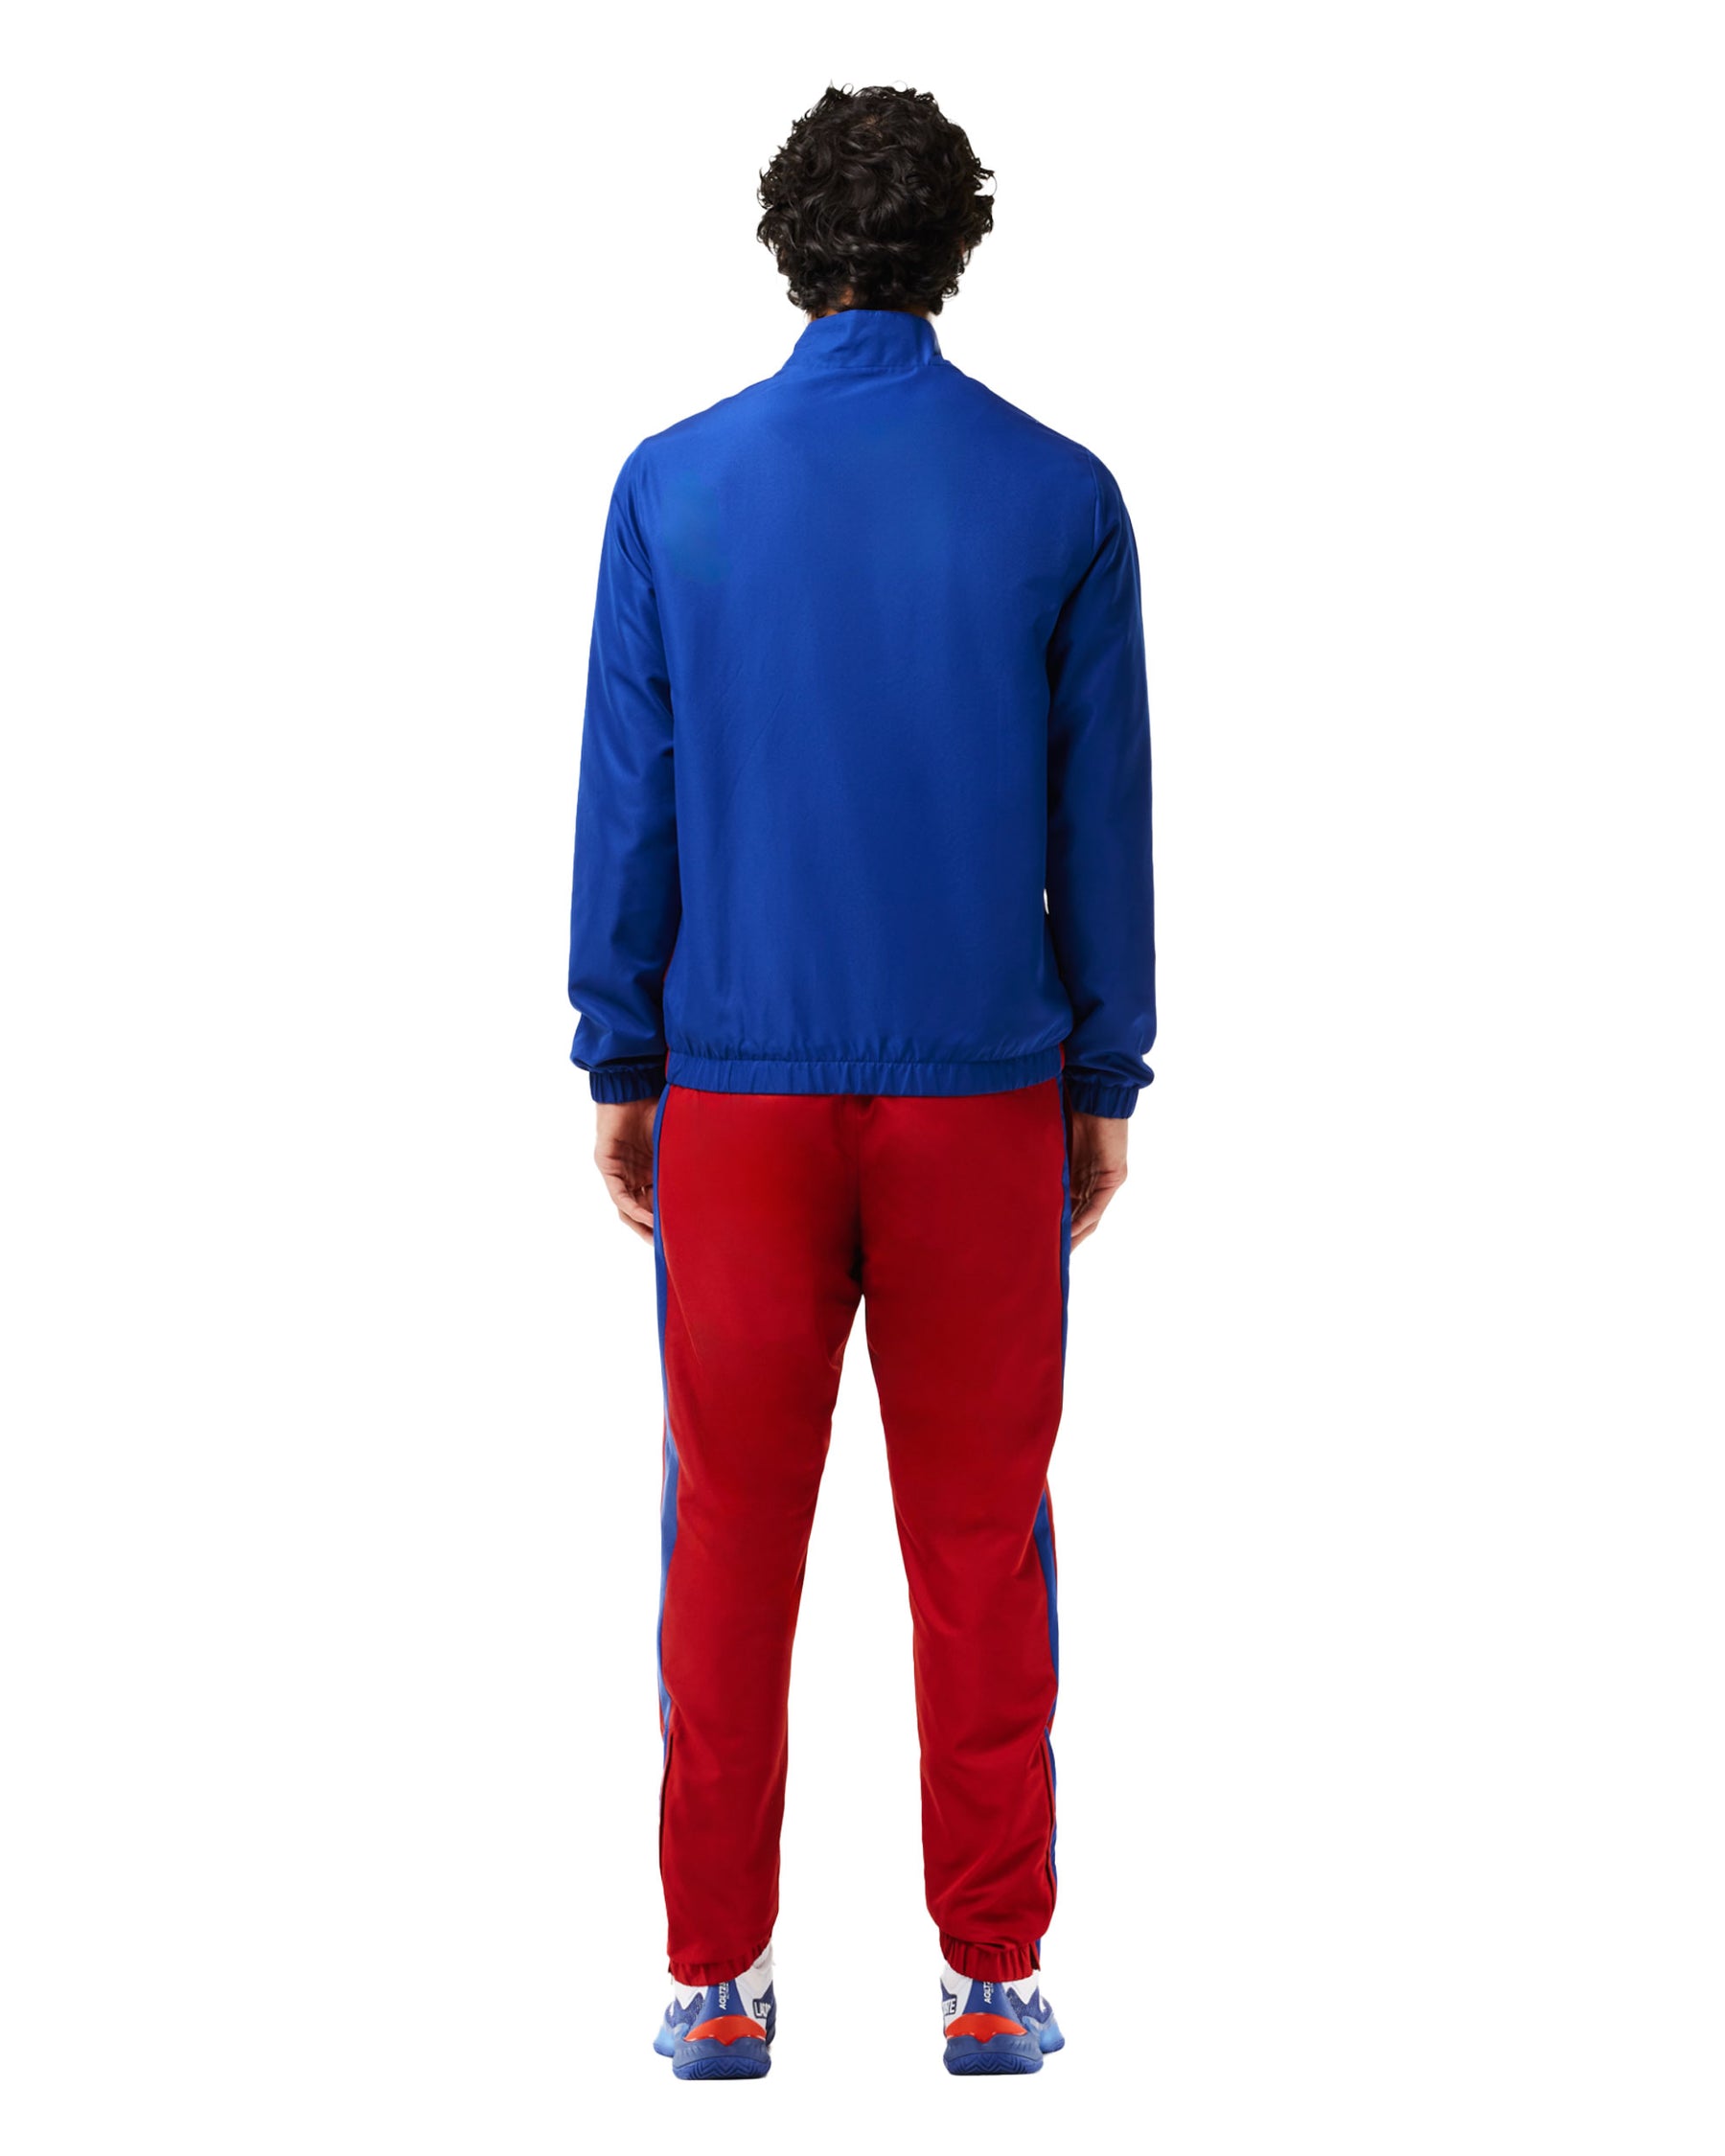 Man Suit Lacoste Red Royal